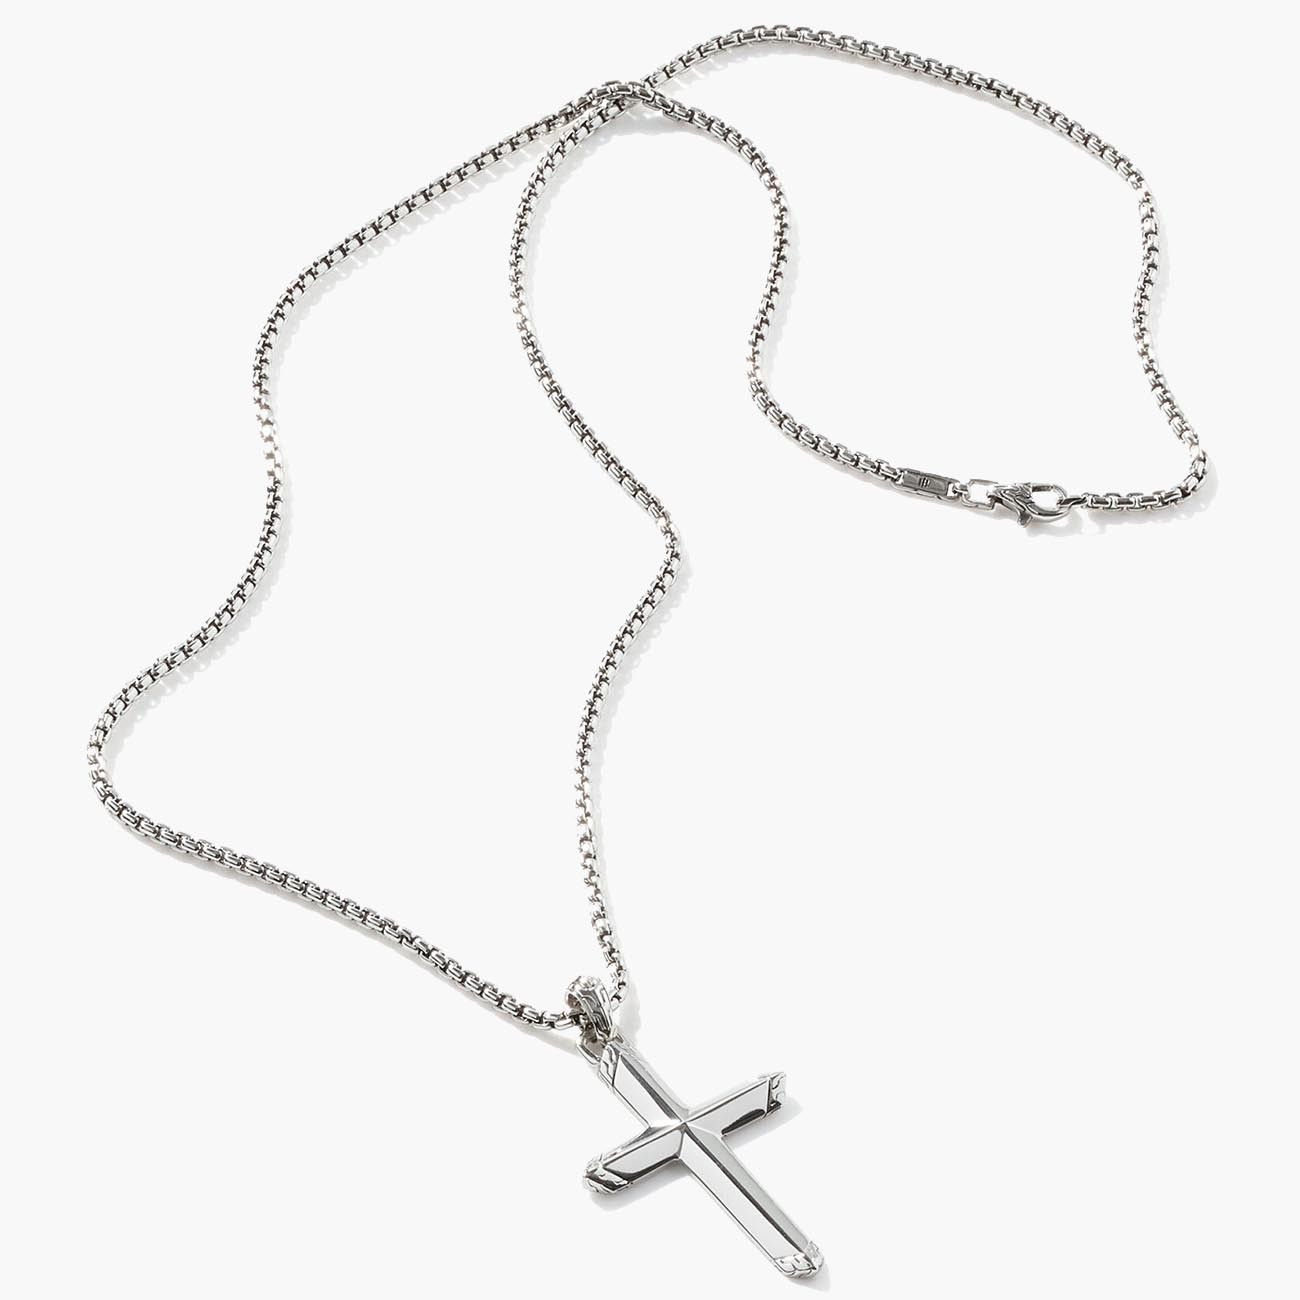 Silver Sideways Cross Necklace – Designed by Stacey Jewelry, LLC